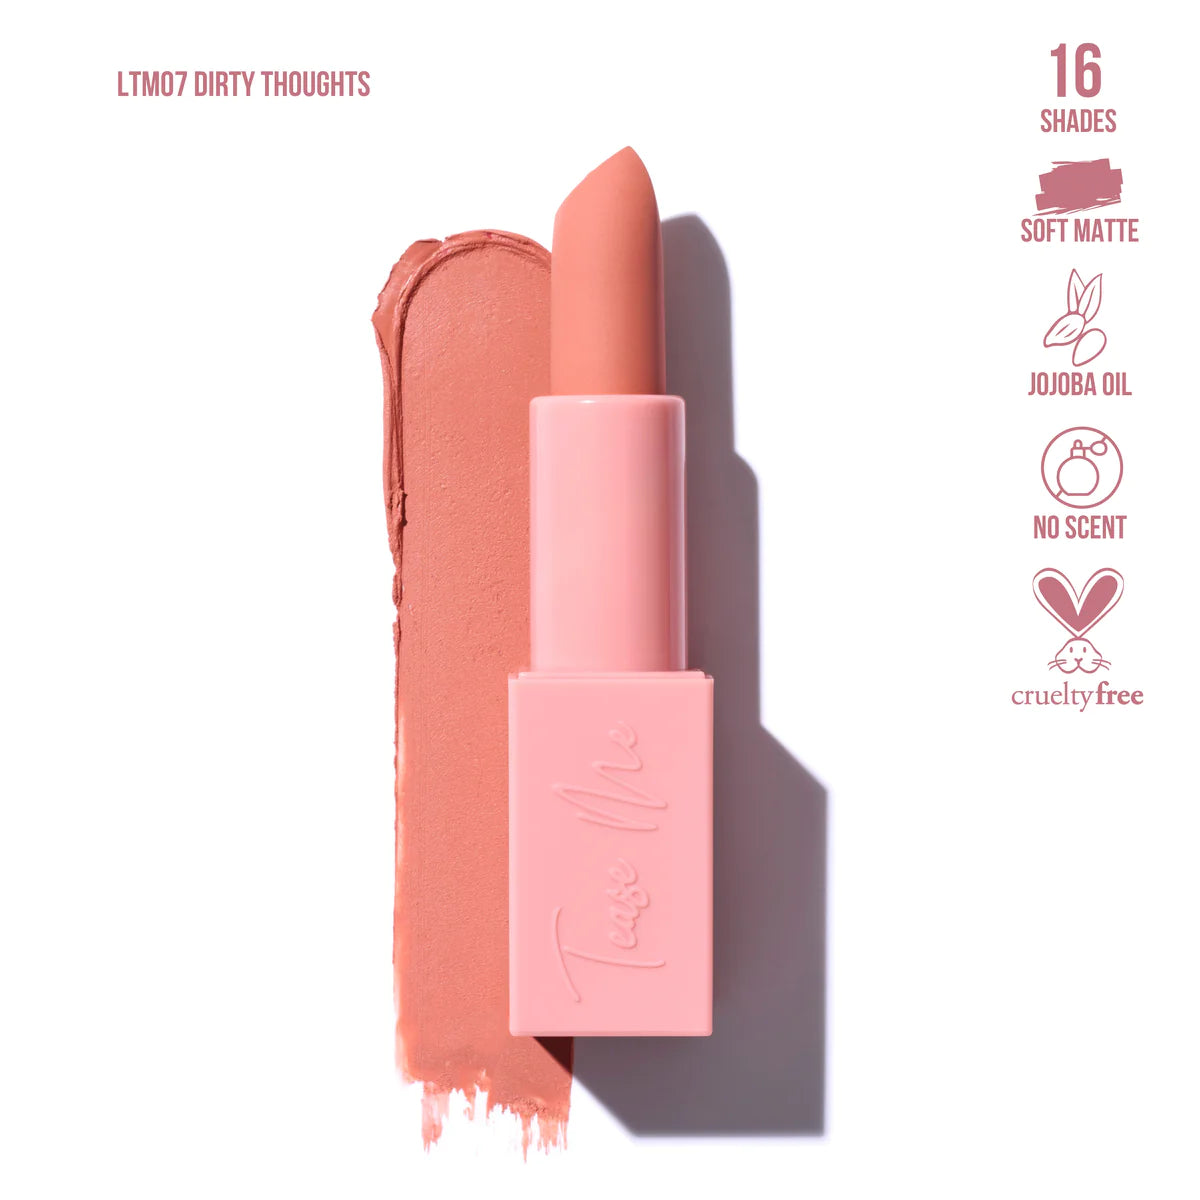 BEAUTY CREATIONS DIRTY THOUGHTS Lipstick